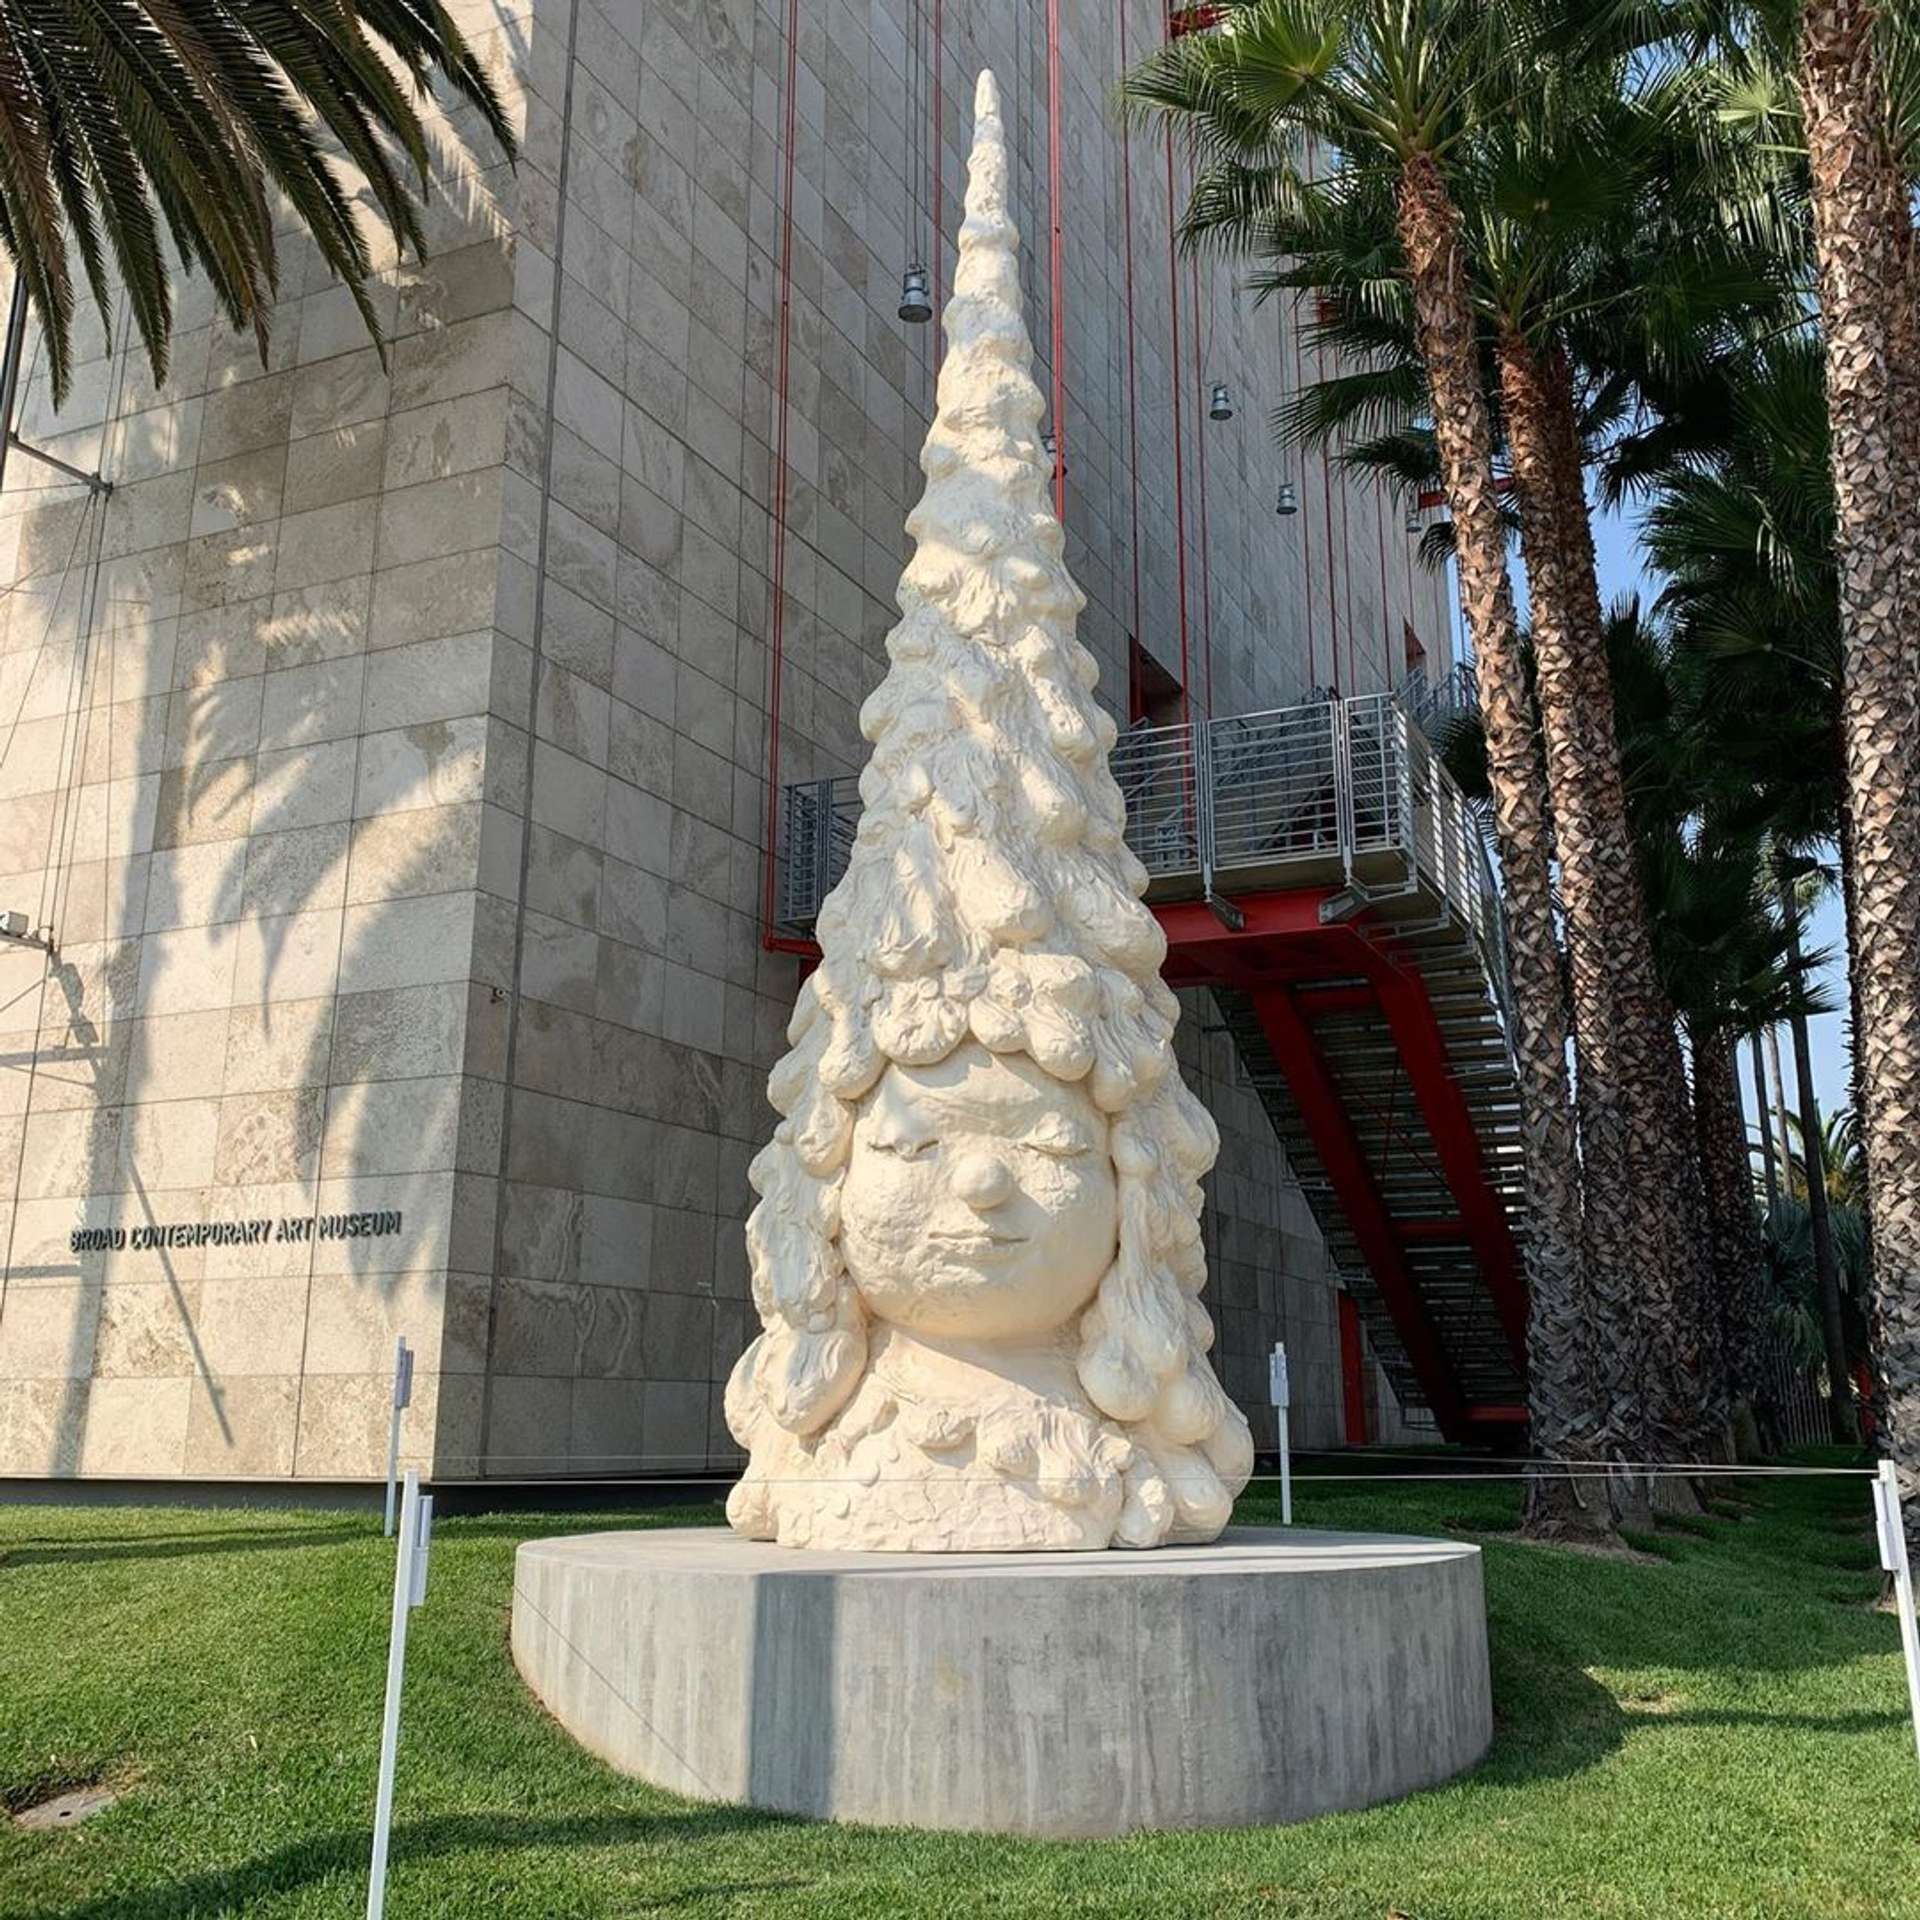 White miss forest sculpture pictured in installation at Los Angeles contemporary art museum. She is shown as a face at the base of a tall tree reminiscent of a pine.